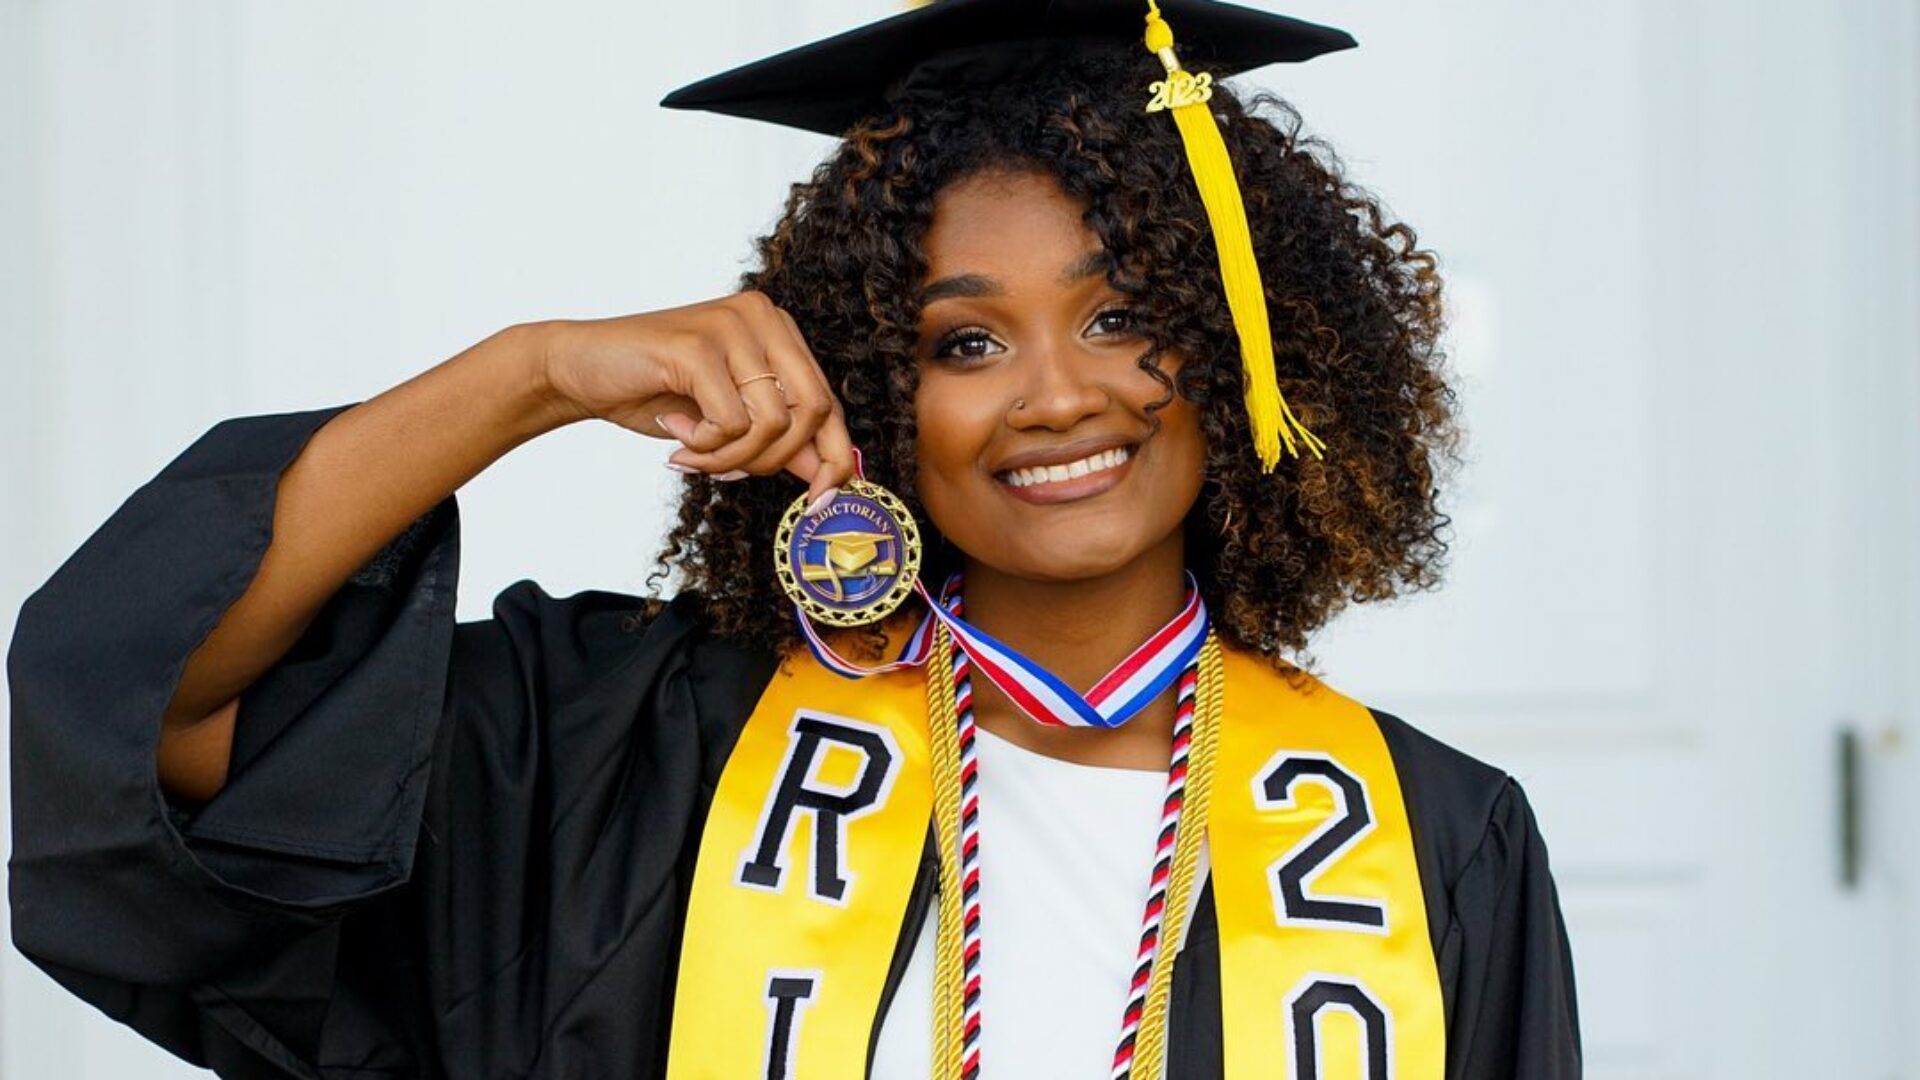 Alecia Washington Sets Record As The First Black Valedictorian In 100-Year History Of Reynolds High School